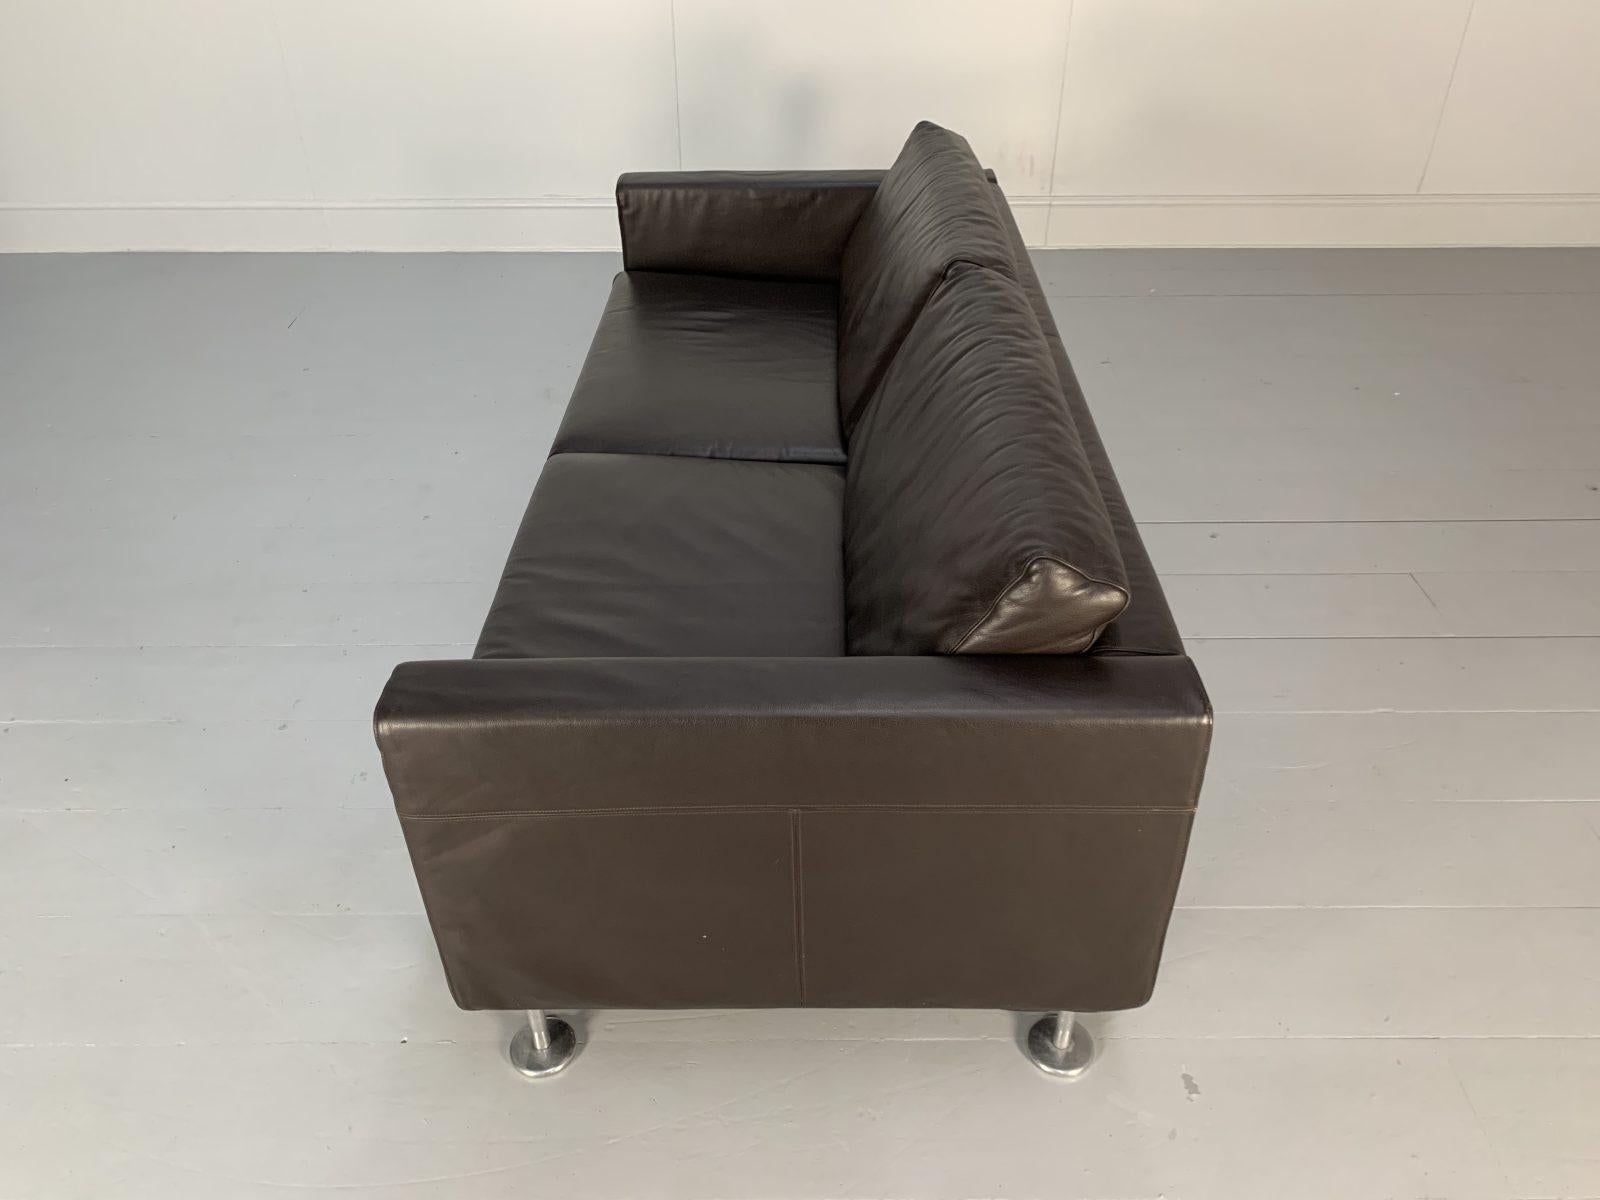 Vitra “Park” 2-Seat Sofa, in Dark Brown Leather For Sale 6